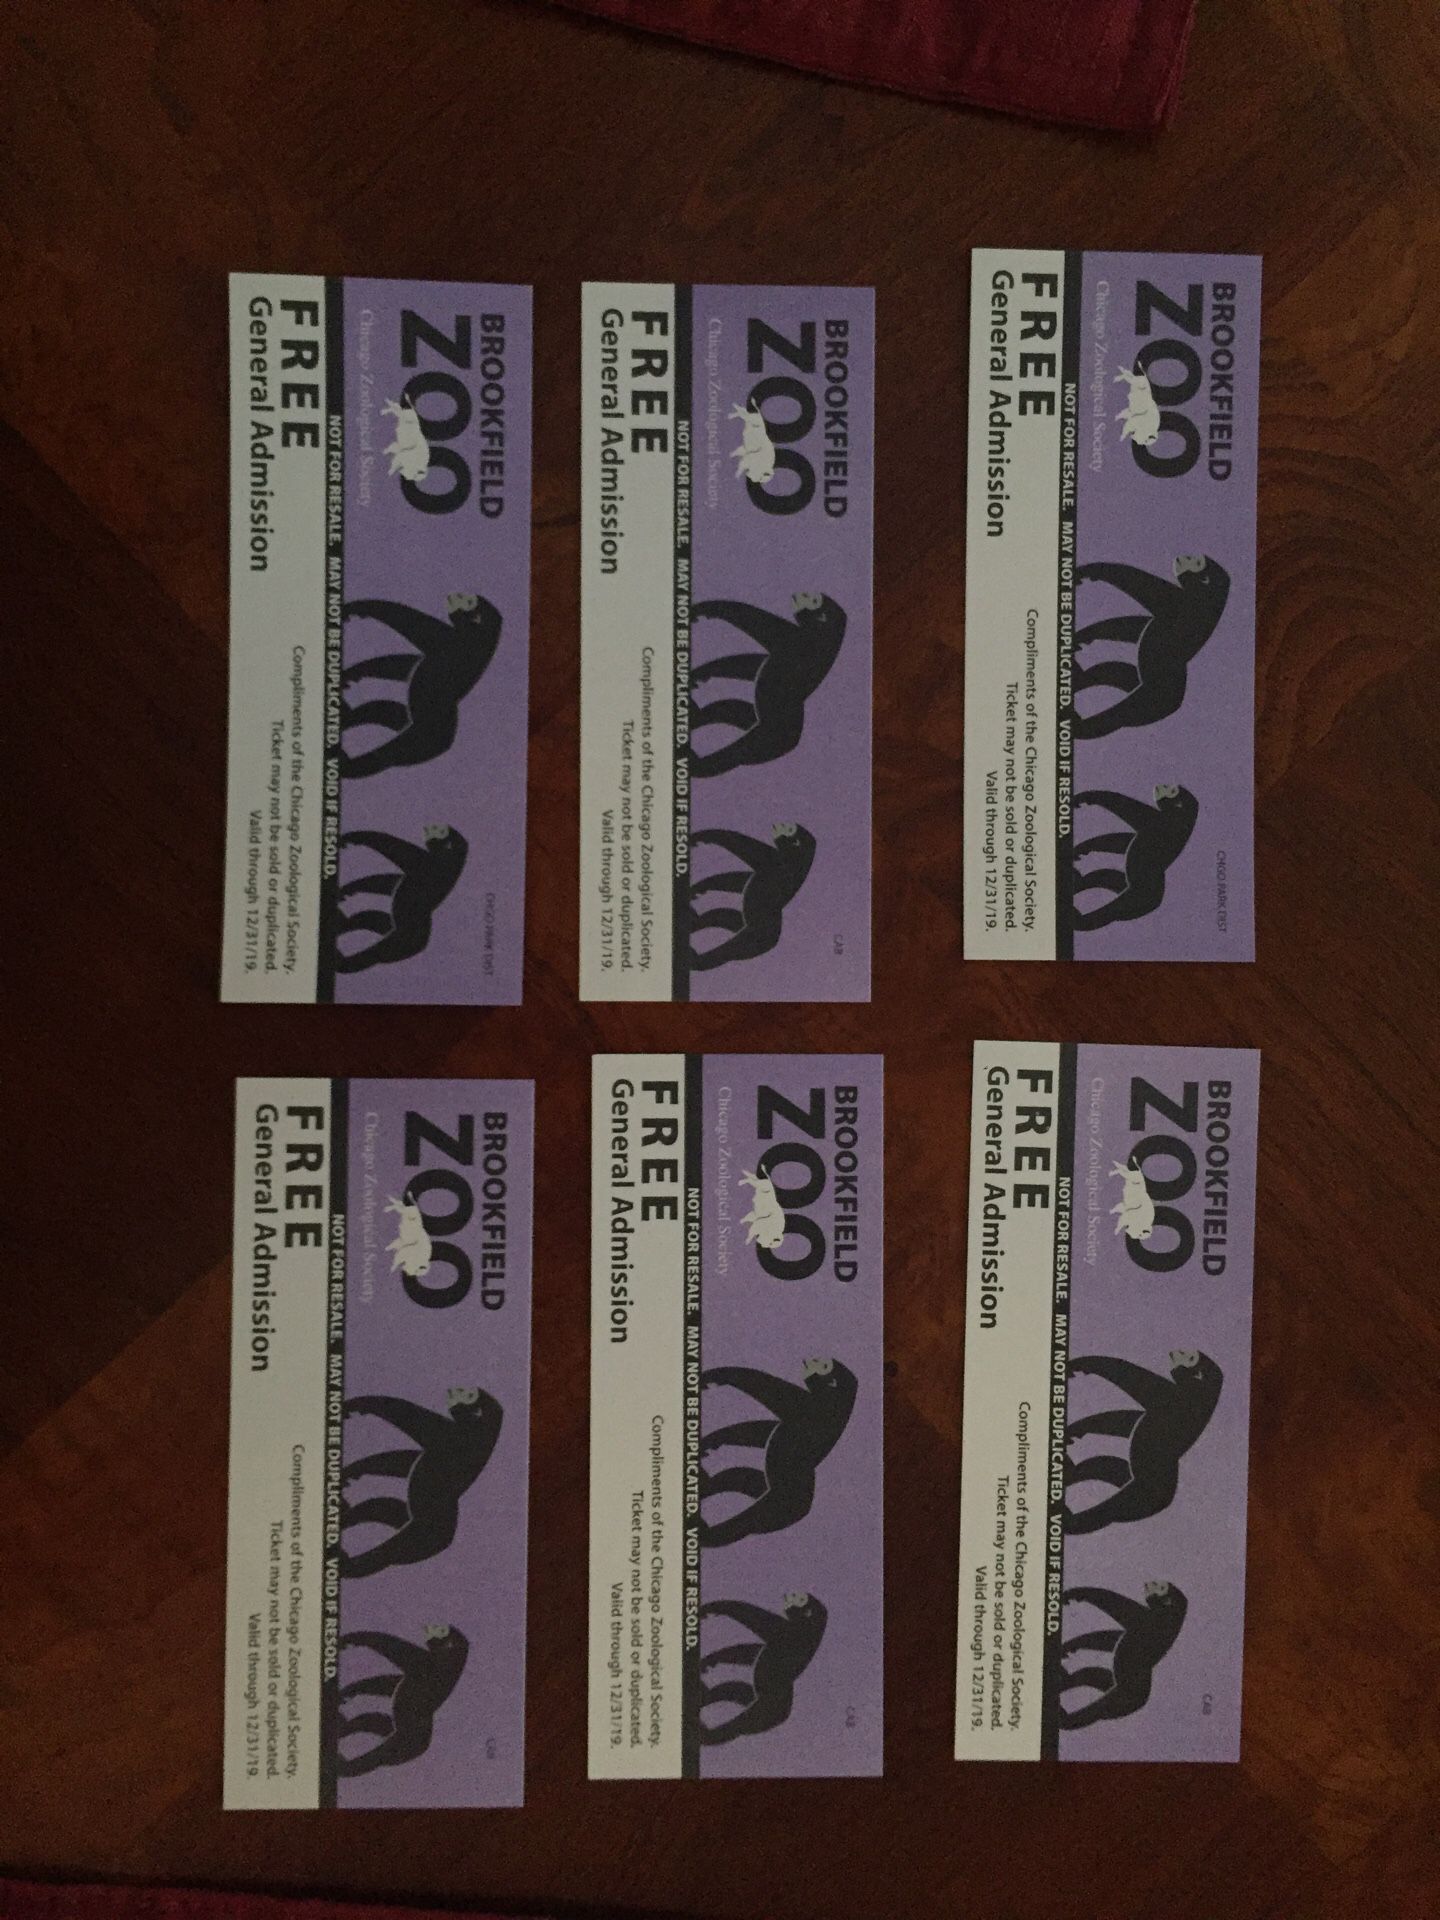 Brookfield Zoo tickets 6 tickets for $50